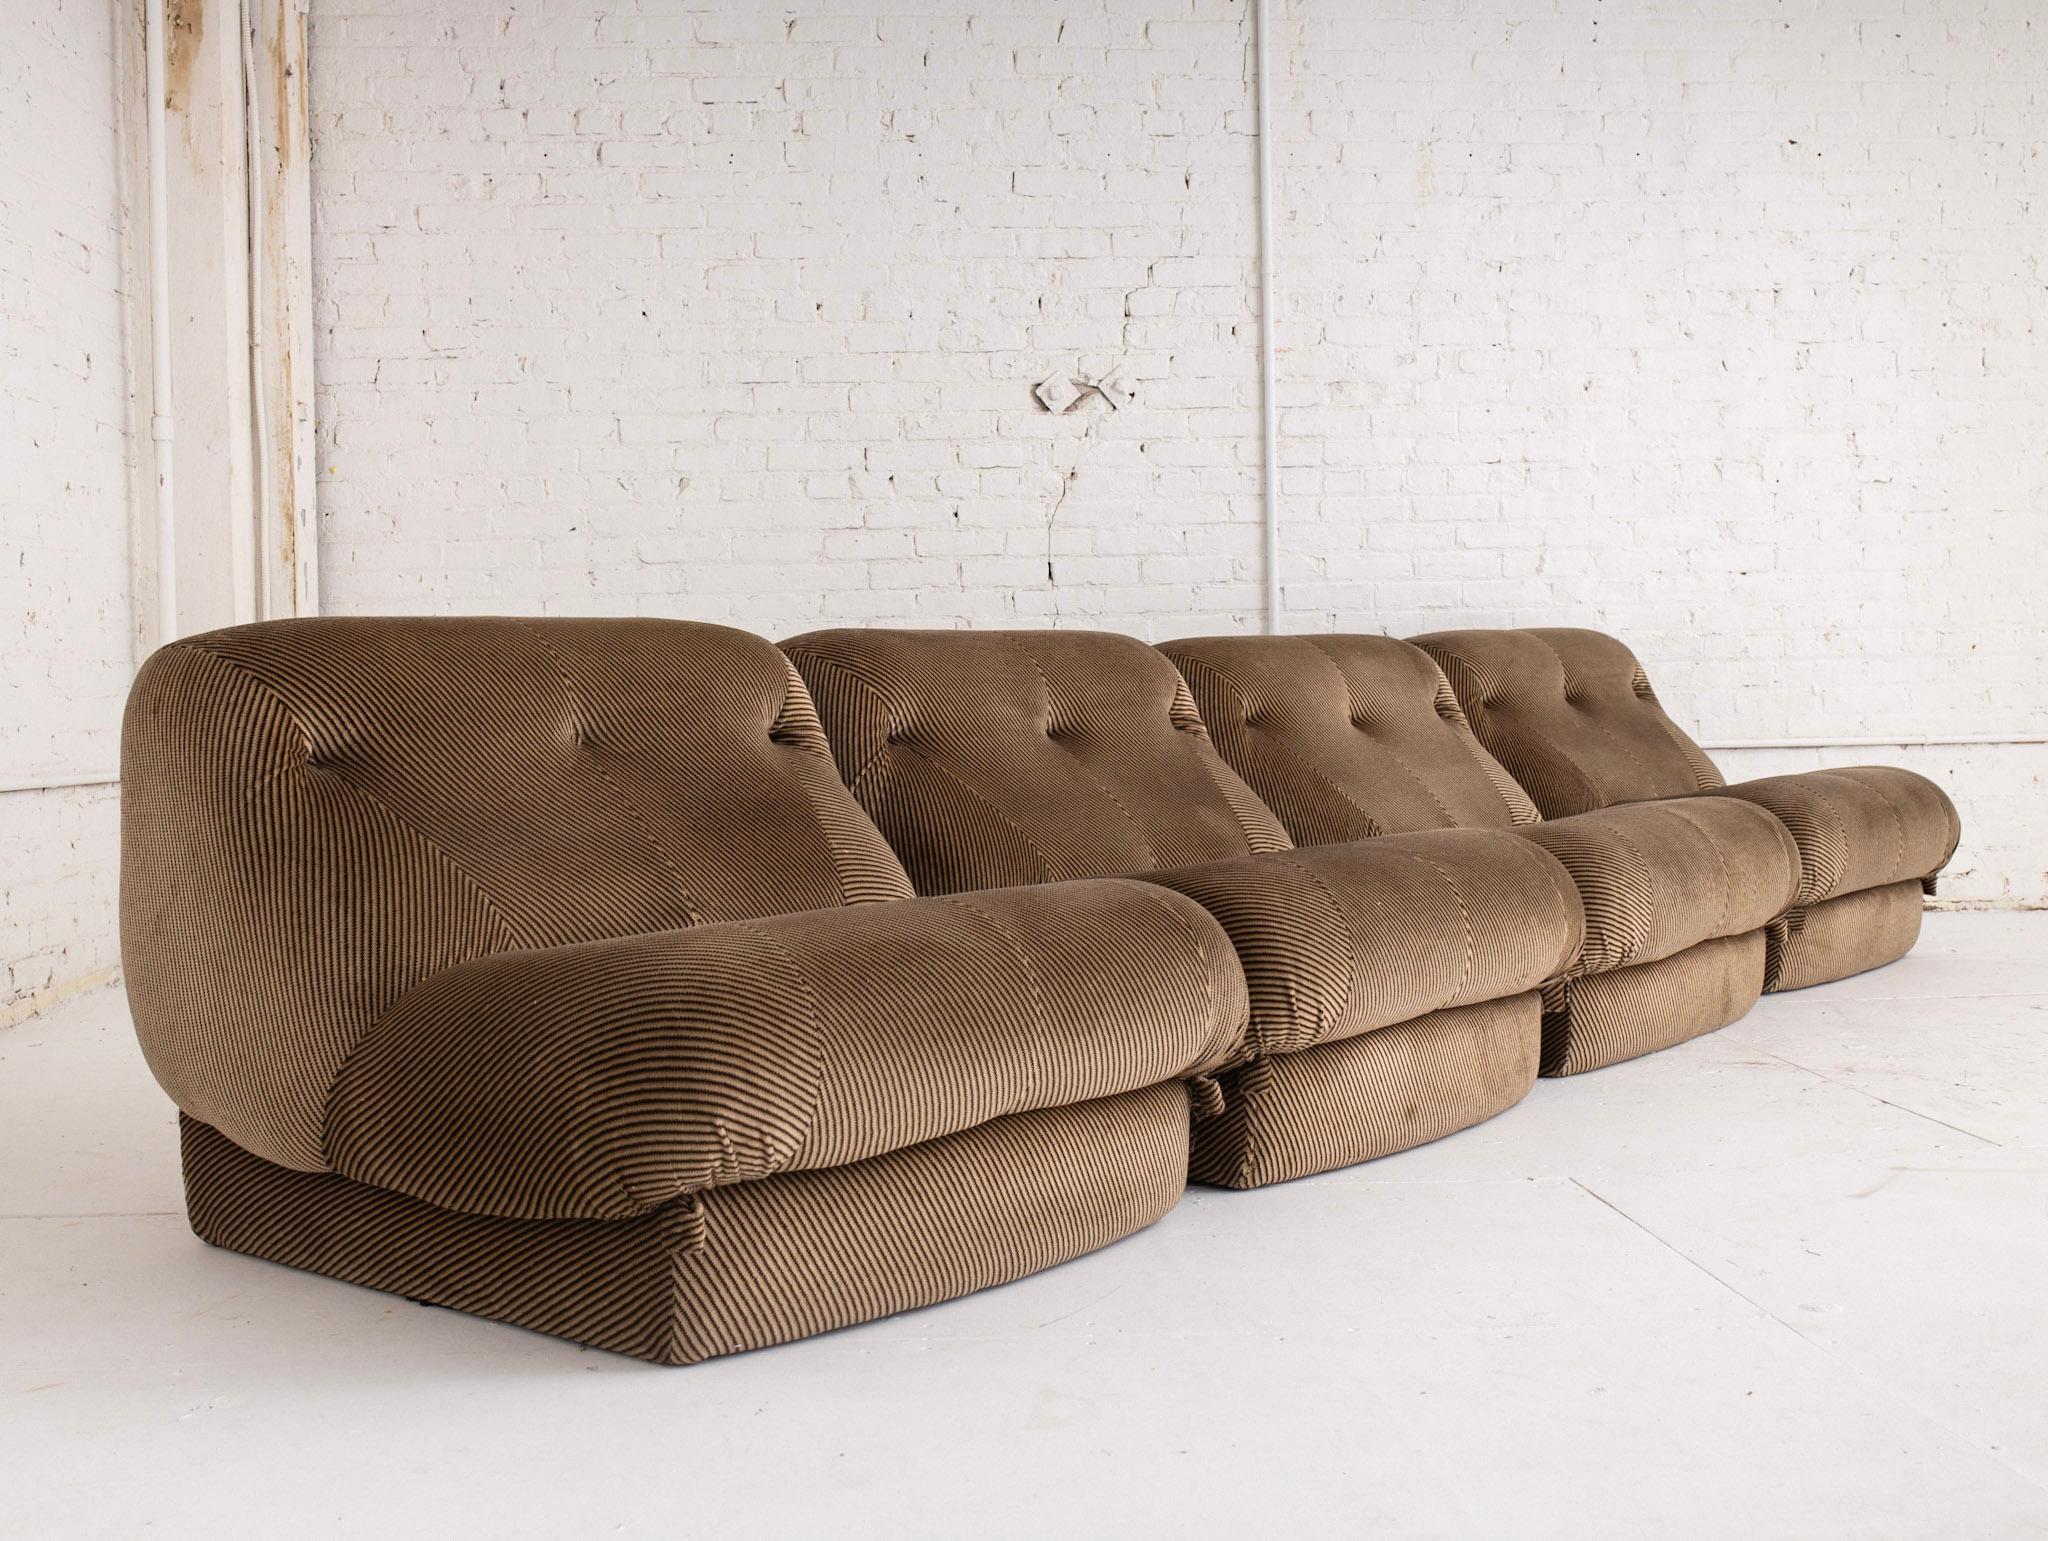 Italian 4 piece modular sectional attributed to Rino Maturi for Mimo Leone and Co. Original stripe velvet fabric as found. Sourced outside of Florence, Italy. Each individual piece measures 34” wide.